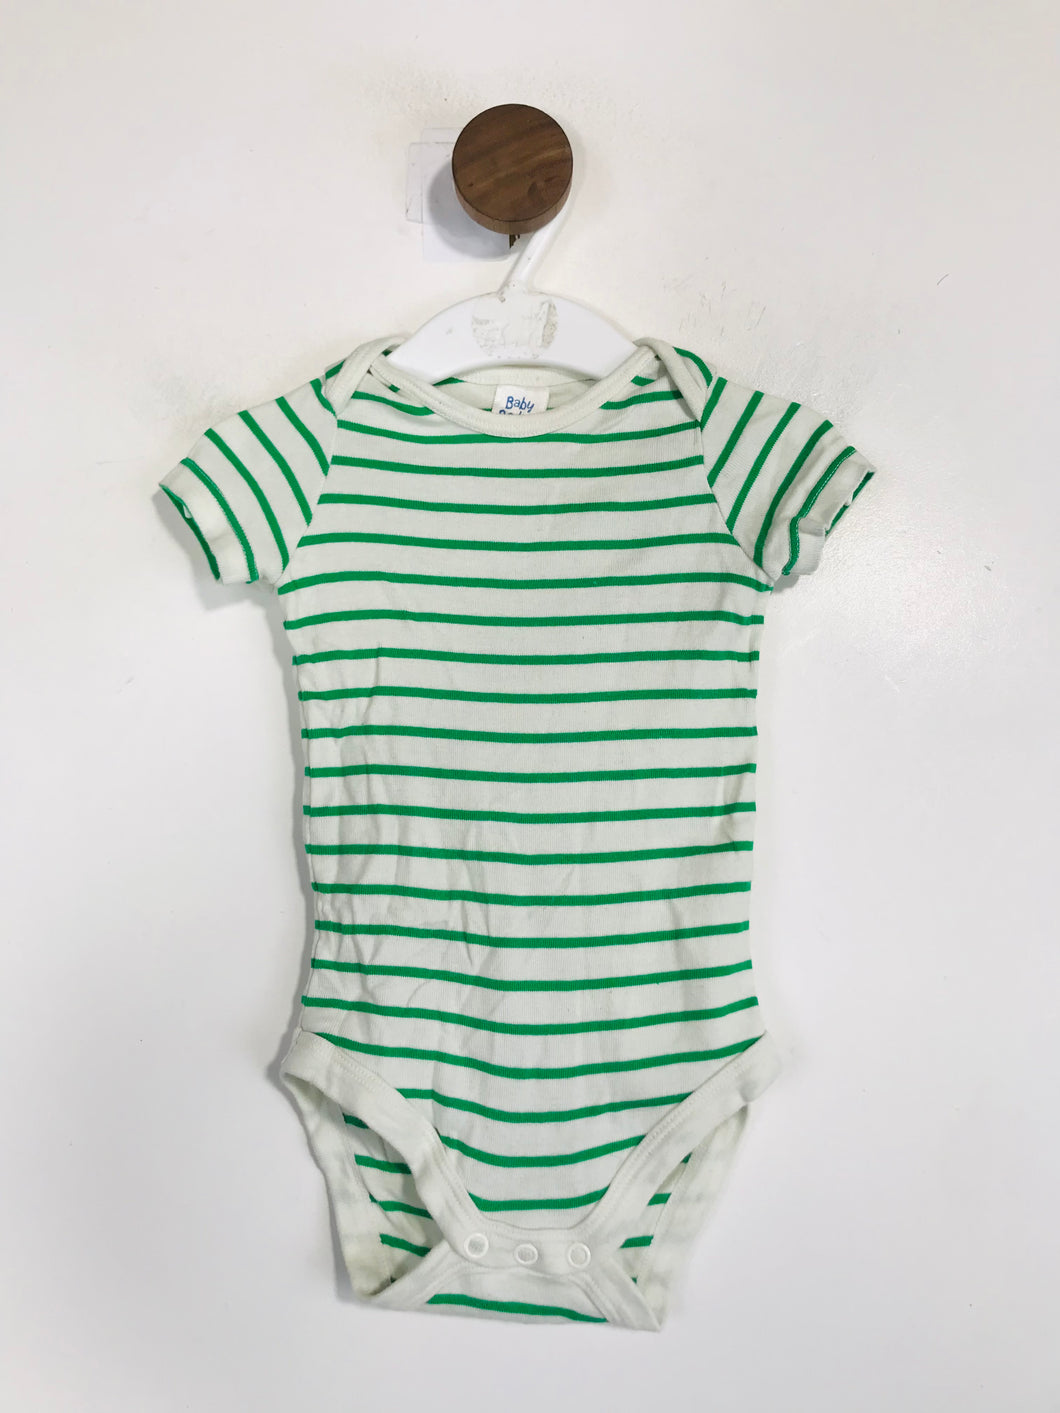 Baby Boden Kid's Striped Babygrow Playsuit | 6-12 Years | White